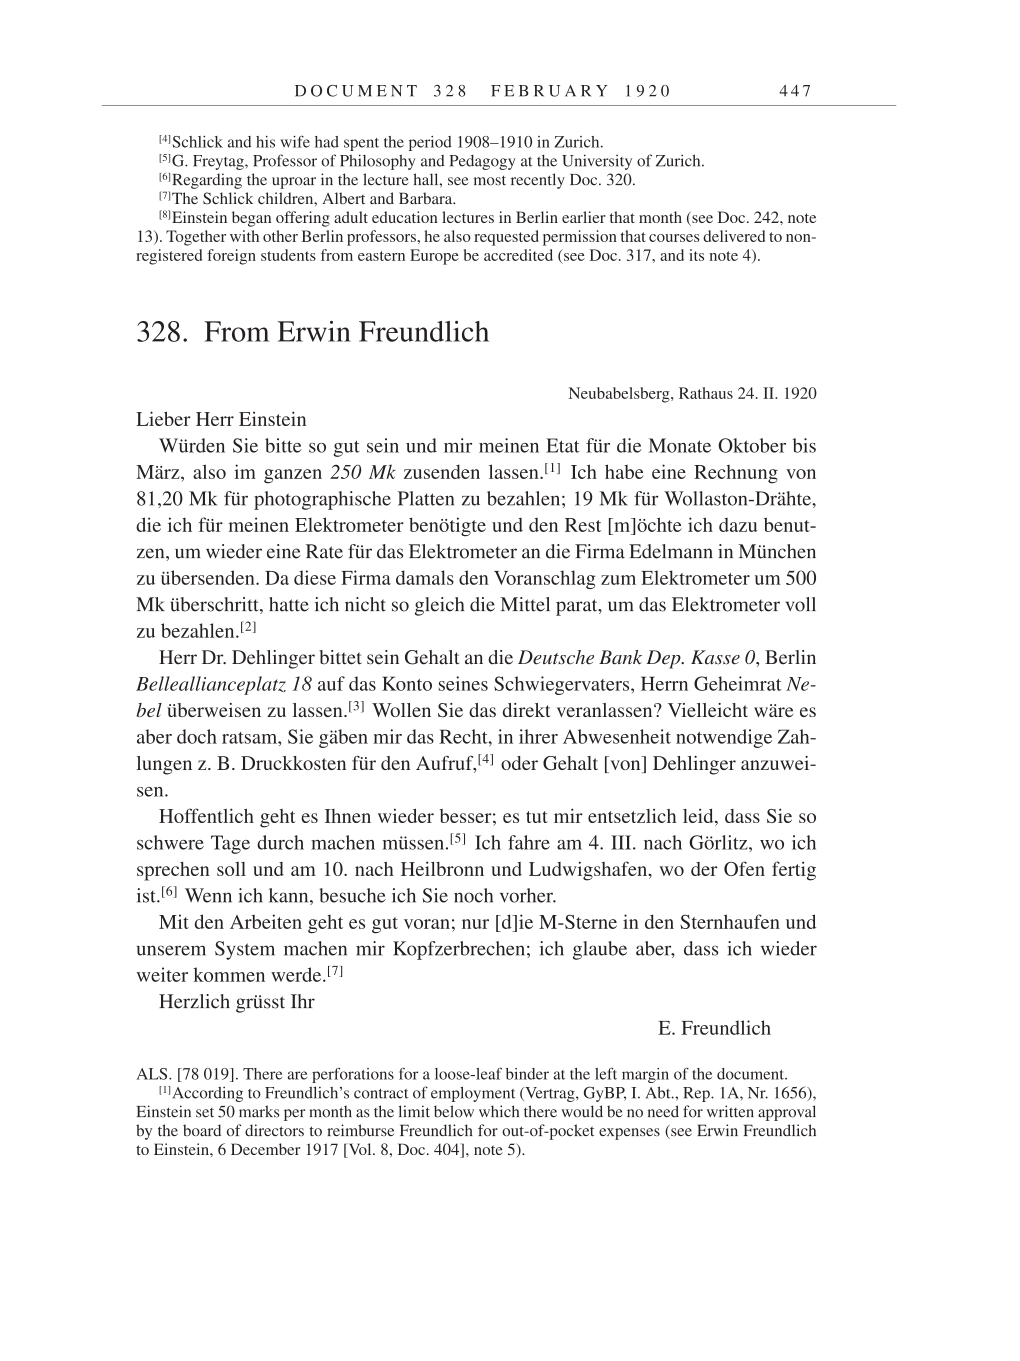 Volume 9: The Berlin Years: Correspondence January 1919-April 1920 page 447